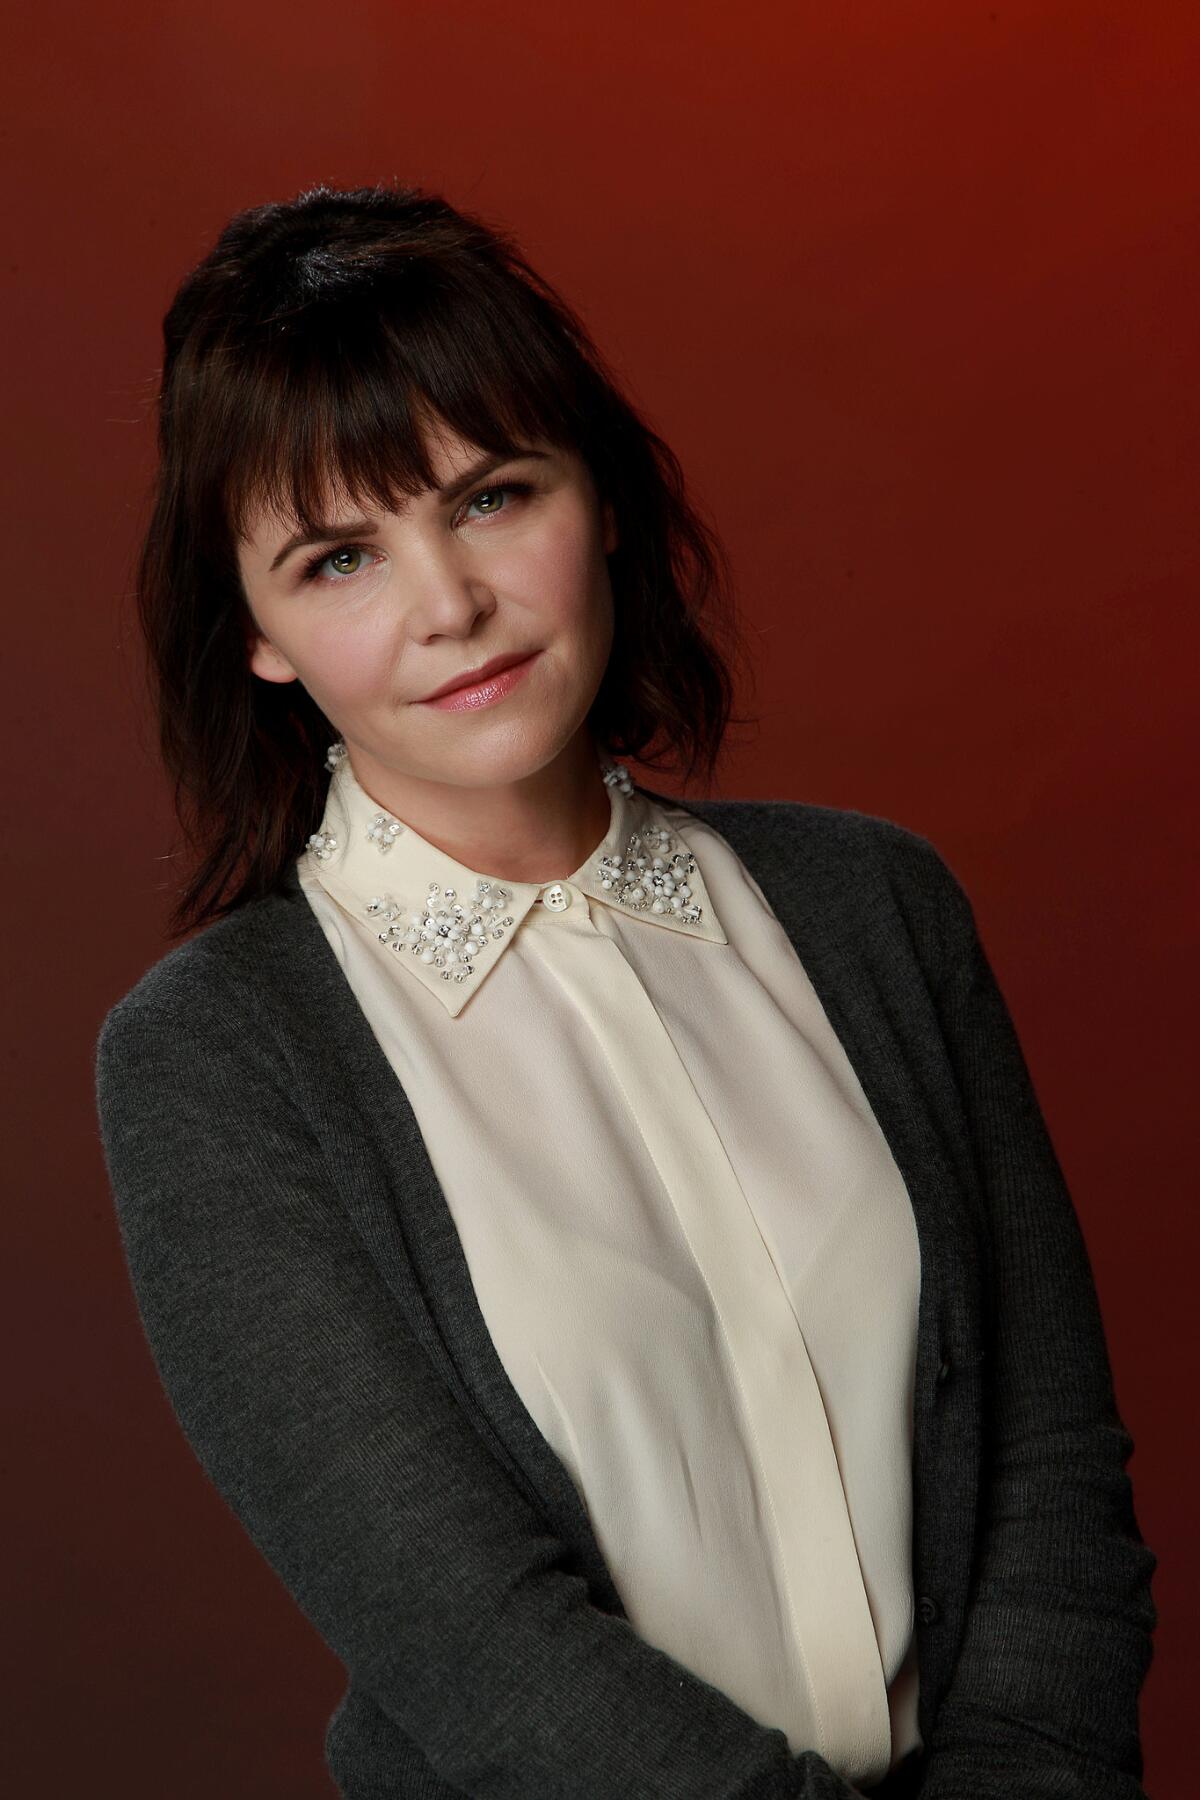 Jennifer Michelle "Ginnifer" Goodwin recently starred in "The Twilight Zone" developed by Simon Kinberg, Jordan Peele, and Marco Ramirez, based on the original 1959 television series created by Rod Serling.